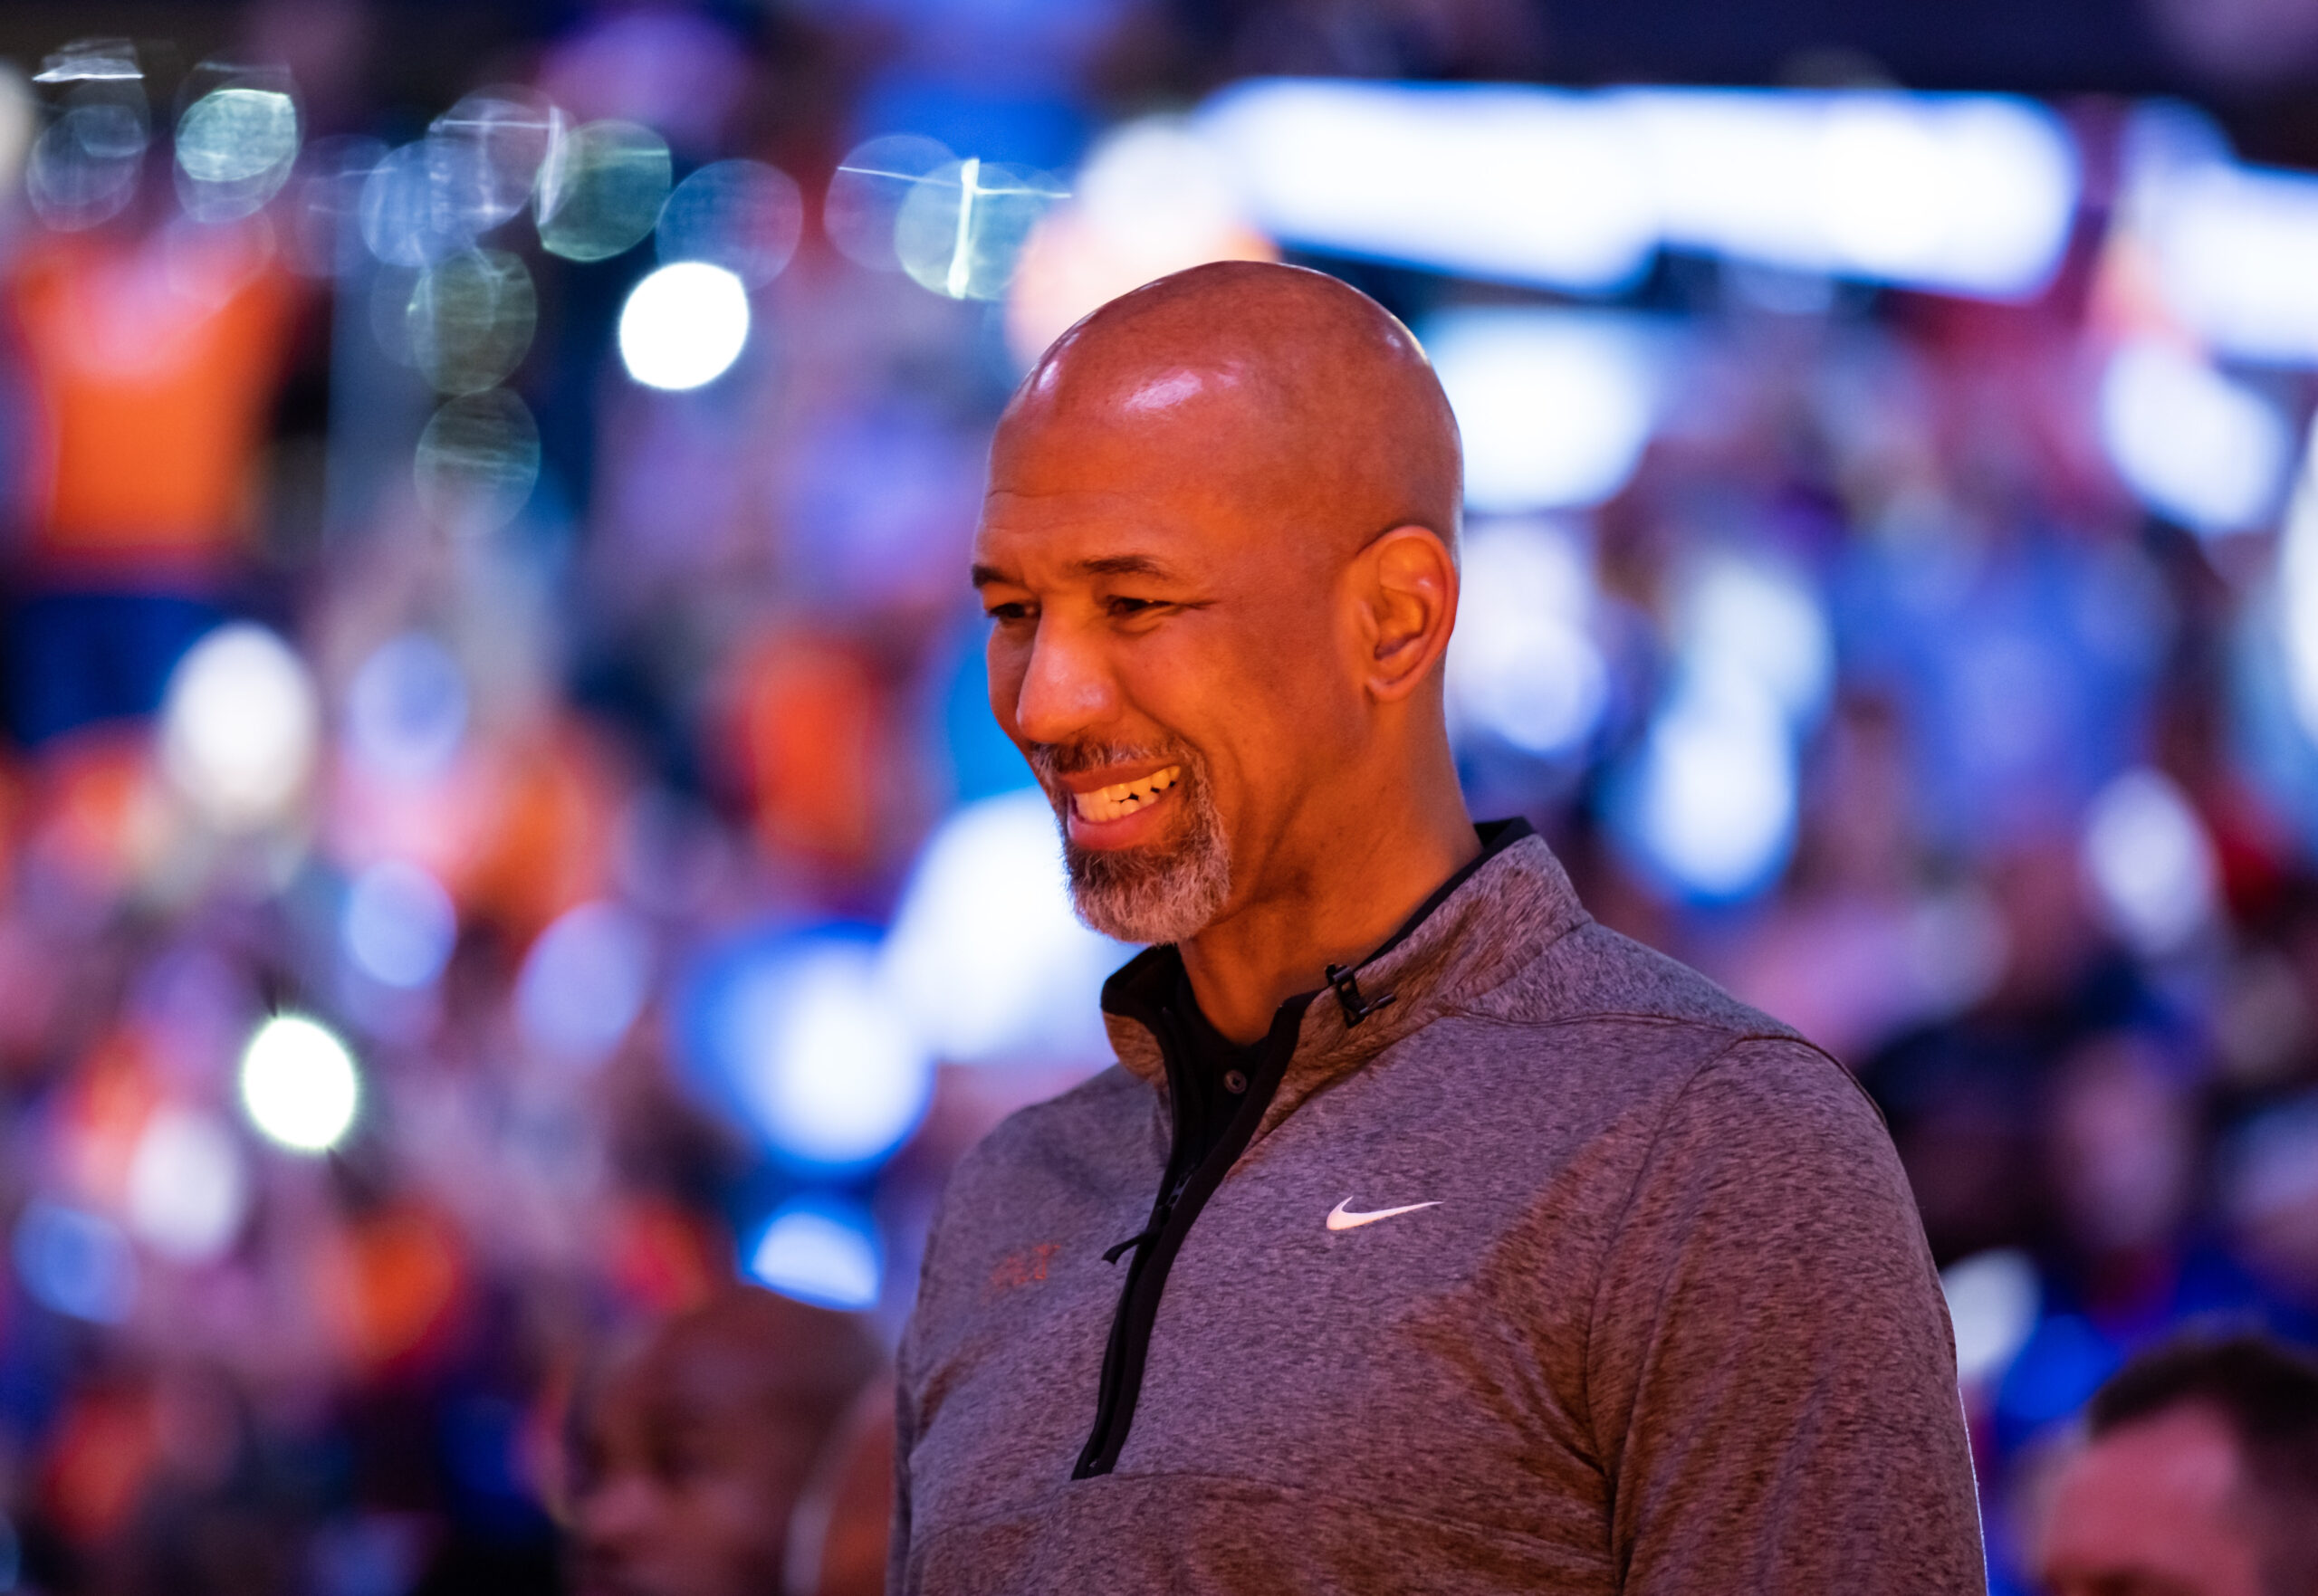 Apr 25, 2023; Phoenix, Arizona, USA; Phoenix Suns head coach Monty Williams against the Los Angeles Clippers during game five of the 2023 NBA playoffs at Footprint Center. Mandatory Credit: Mark J. Rebilas-USA TODAY Sports. Article by Brandon Dent Detroit Pistons